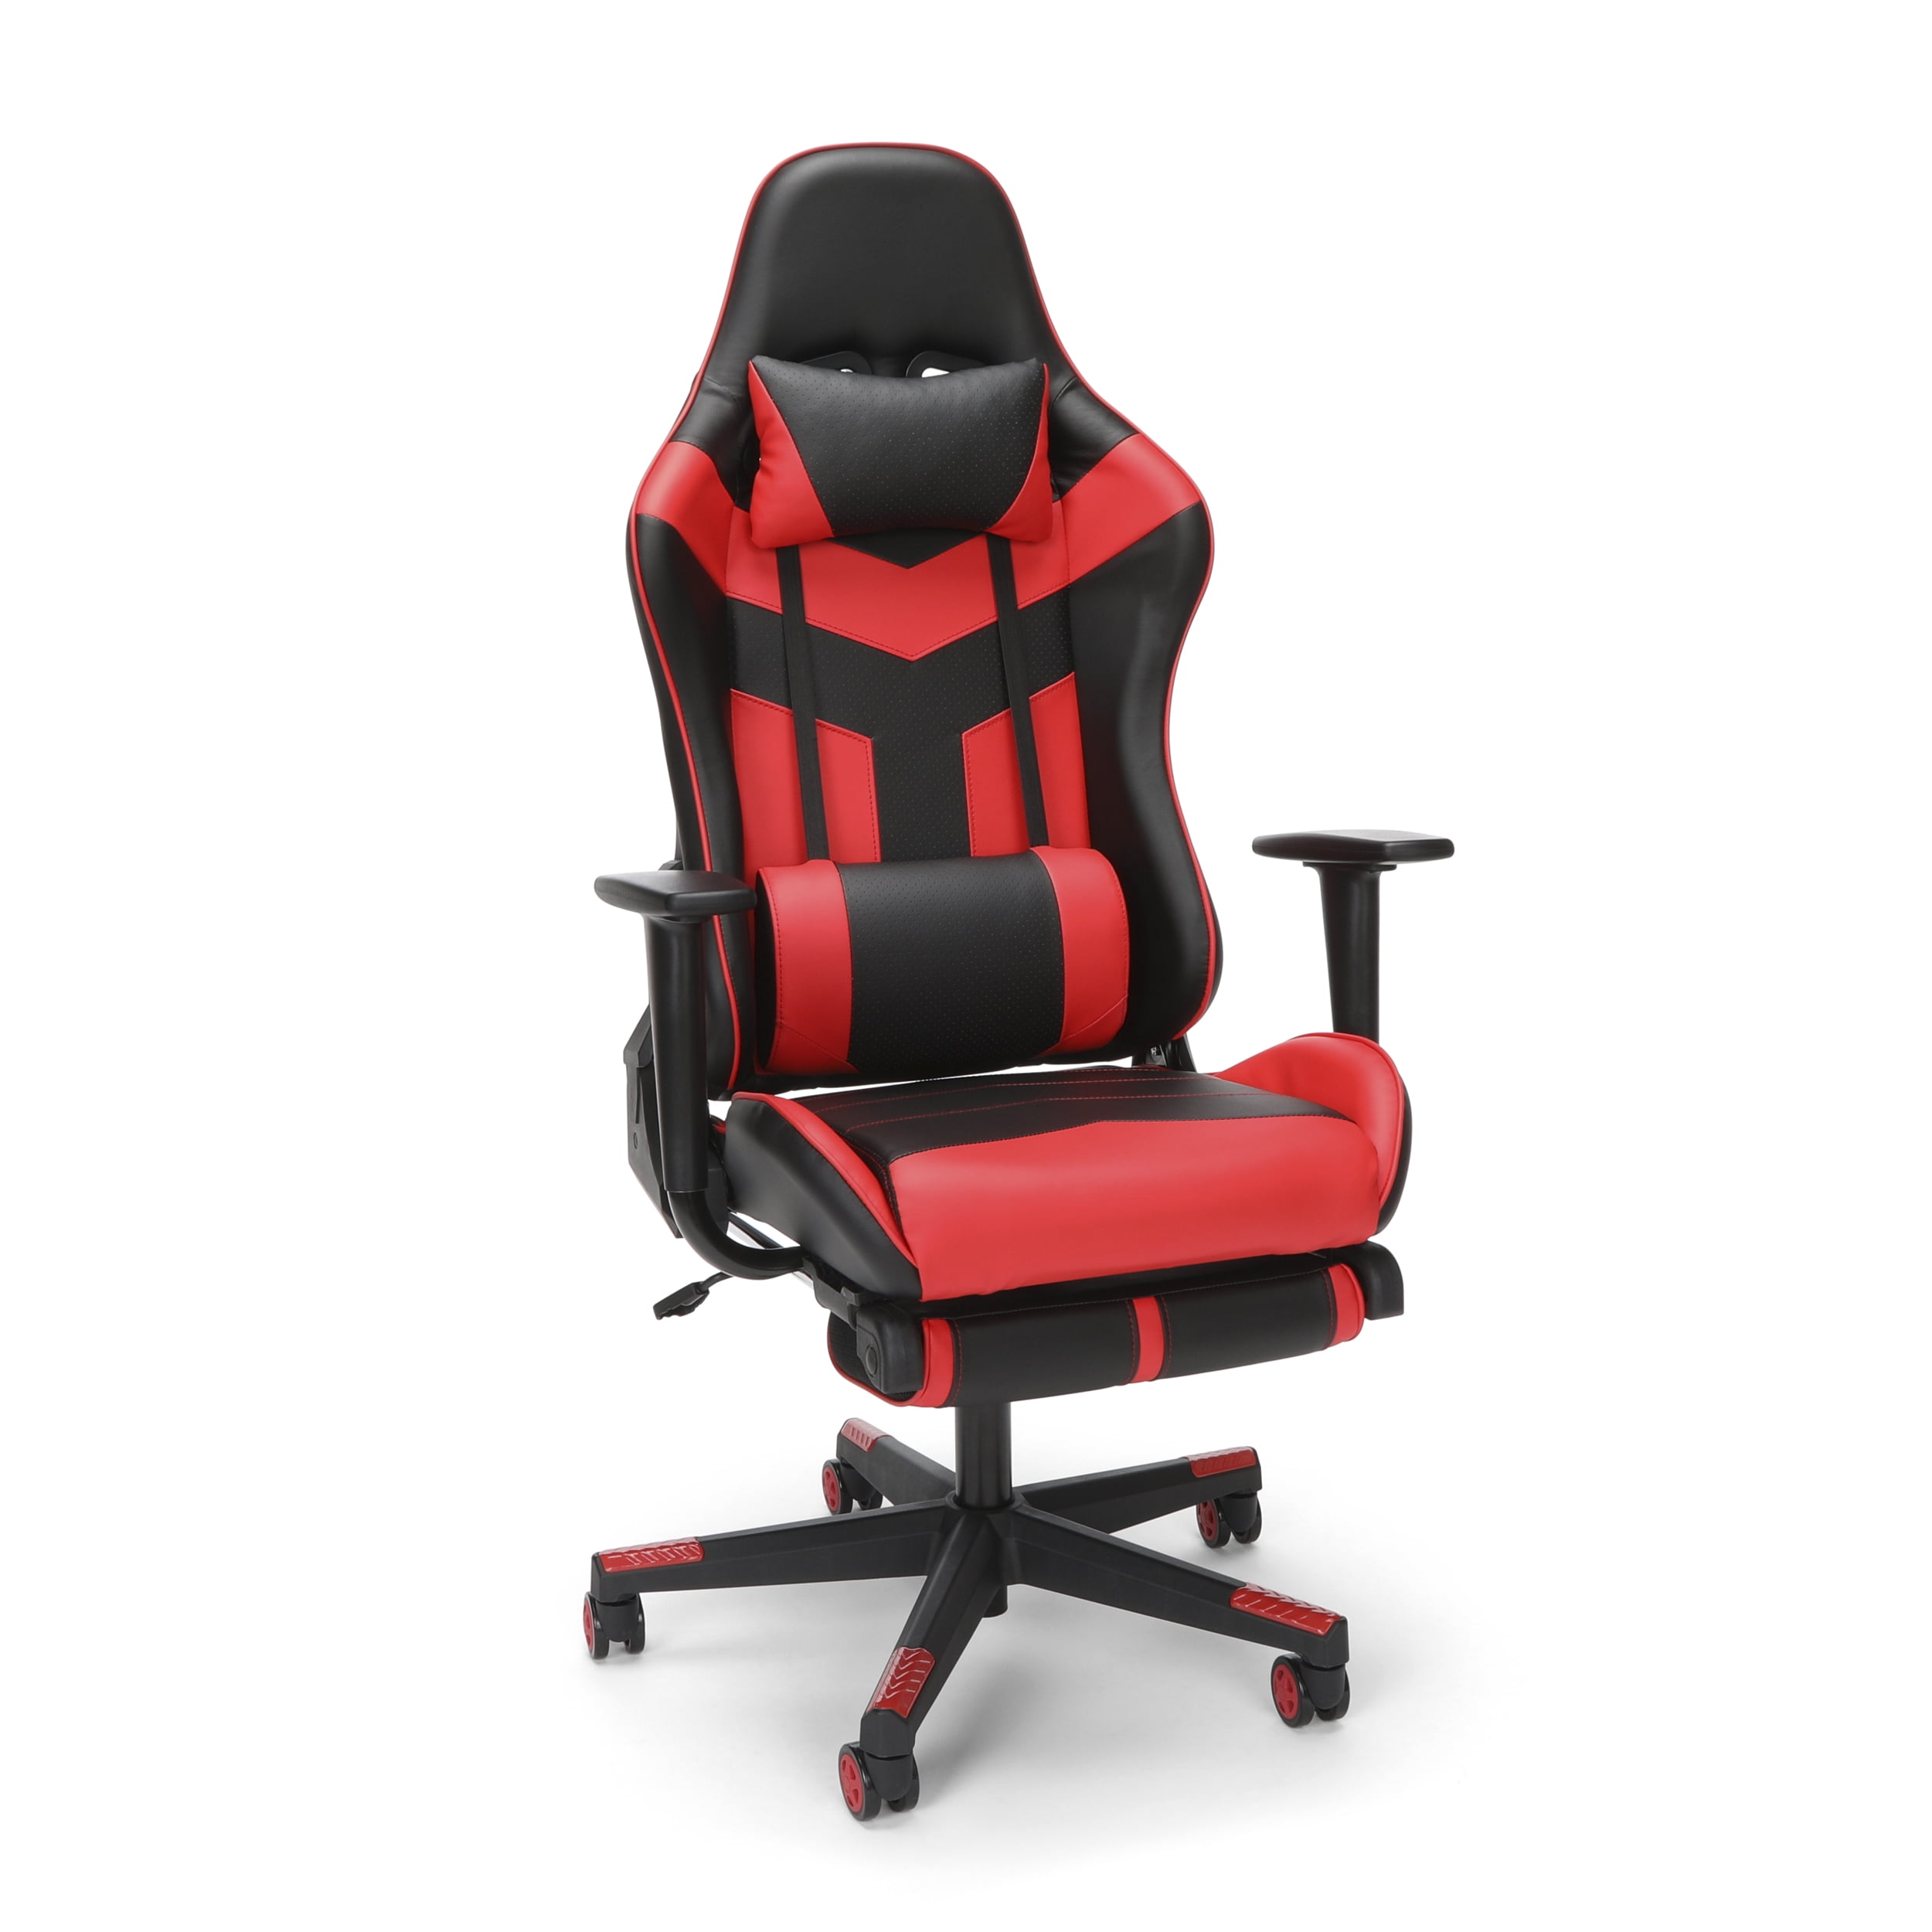 Finally back in the gaming mood. Treated myself to a new chair